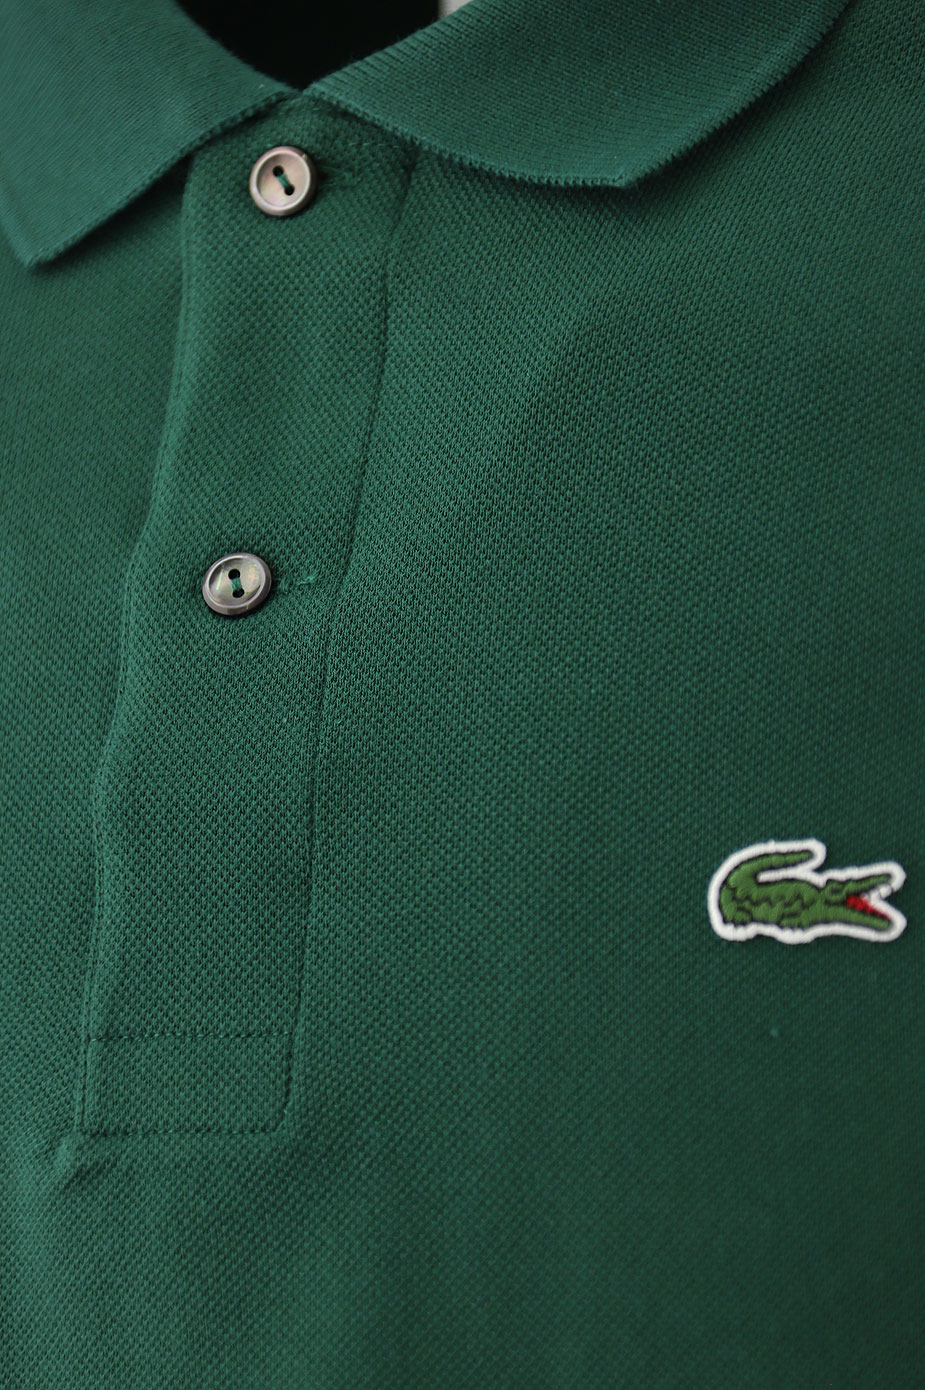 Mens Clothing Lacoste, Style code: l1312-132-